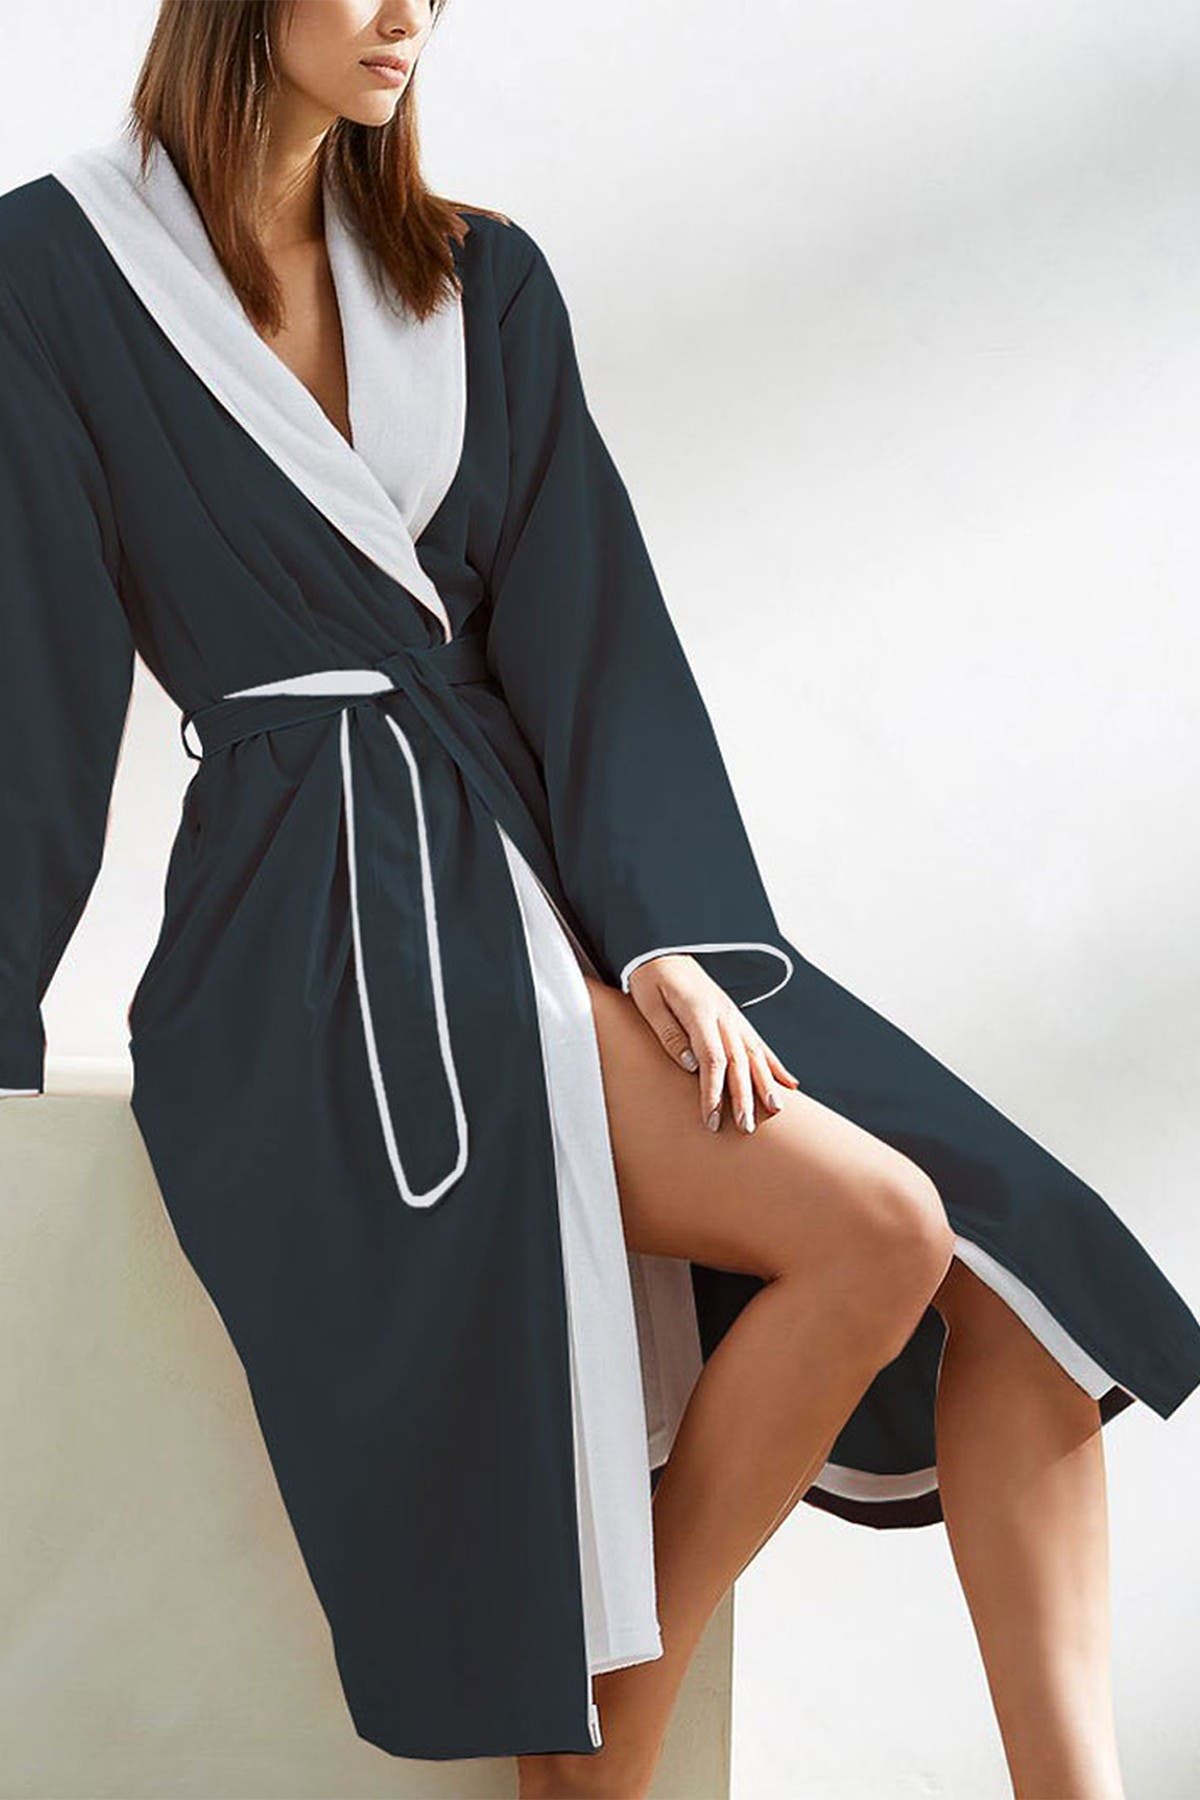 H2 Home Collection Luxury Microfiber Spa Robe In Charcoal